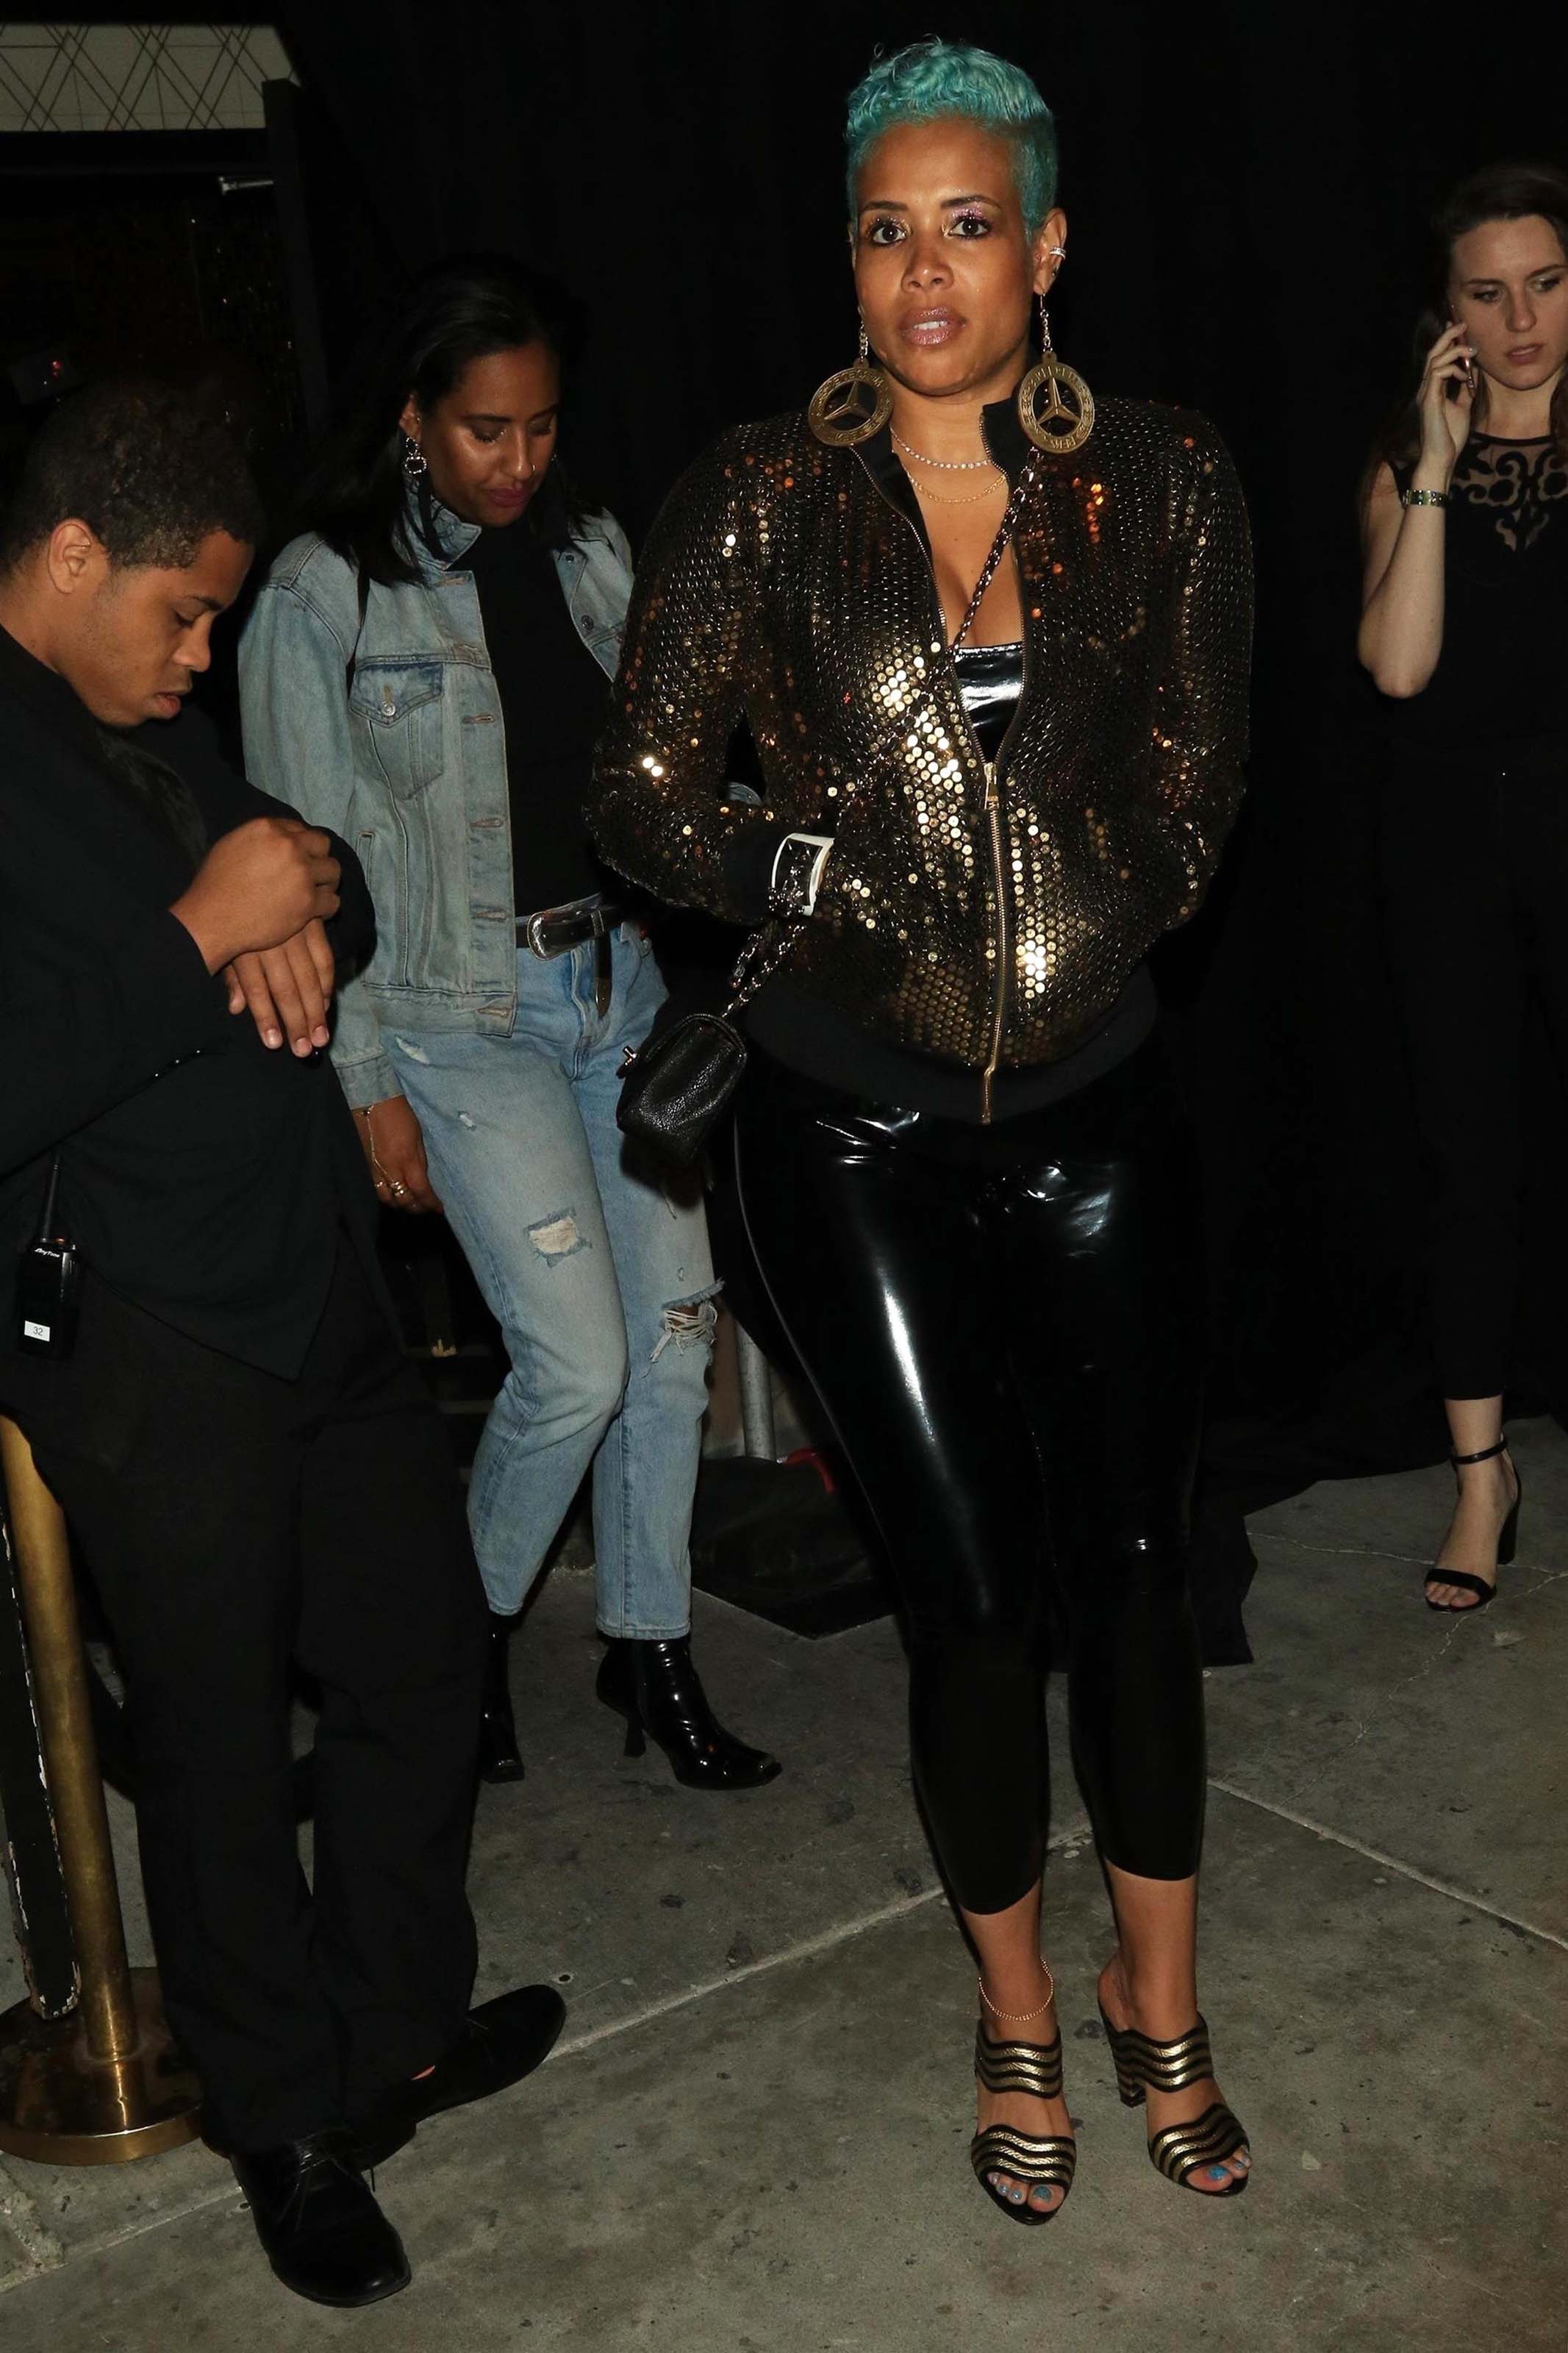 Kelis at Bootsy Bellows in West Hollywood